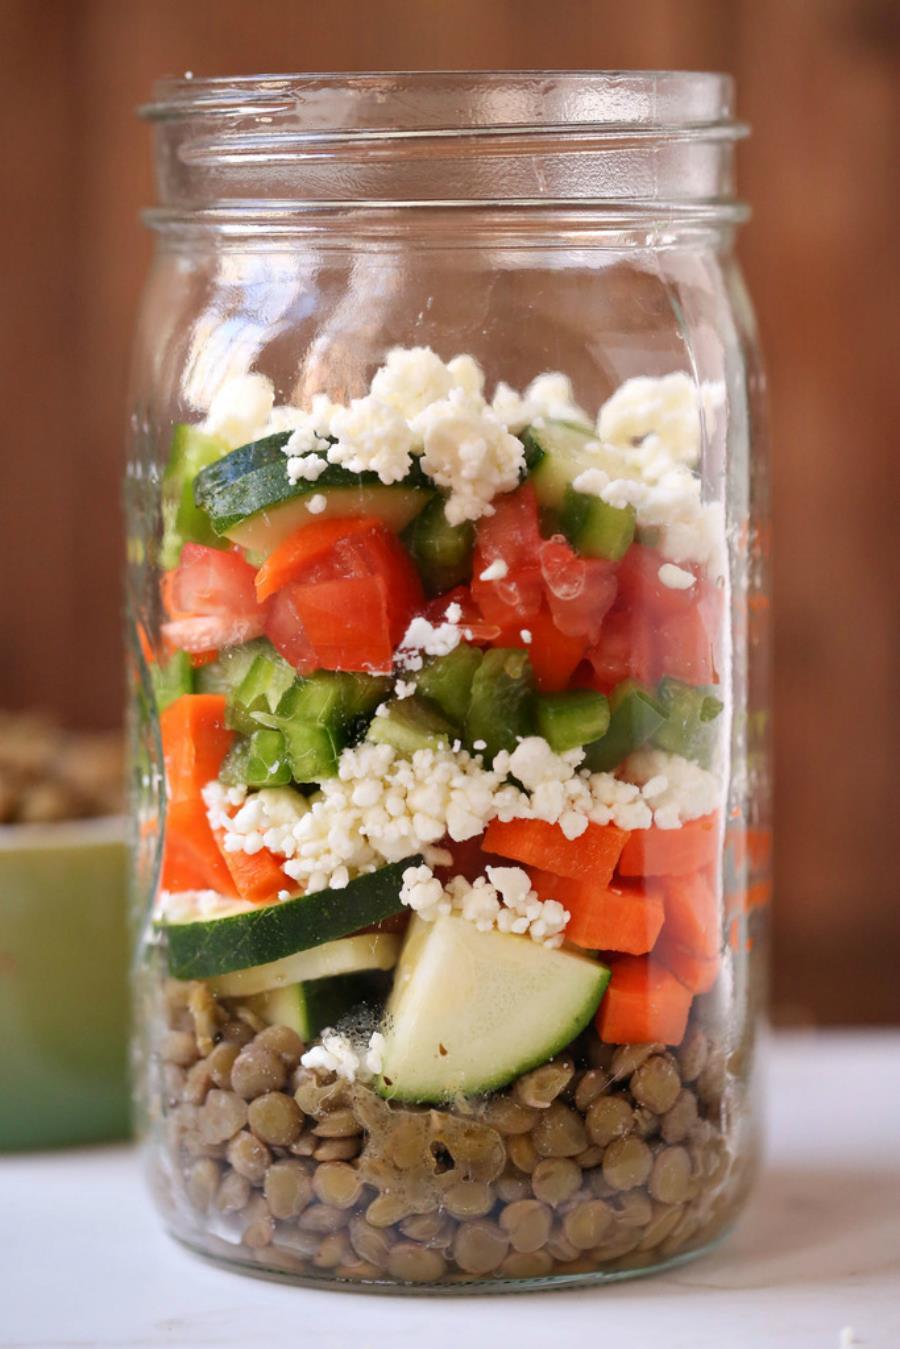 MASON JAR LENTIL SALAD 1 cup of lentils, cooked & drained ⅓ cup zucchini ⅓ cup of feta cheese ⅓ cup diced tomatoes ⅓ cup of bell pepper ¼ cup of diced carrots 1-2 tbsp.